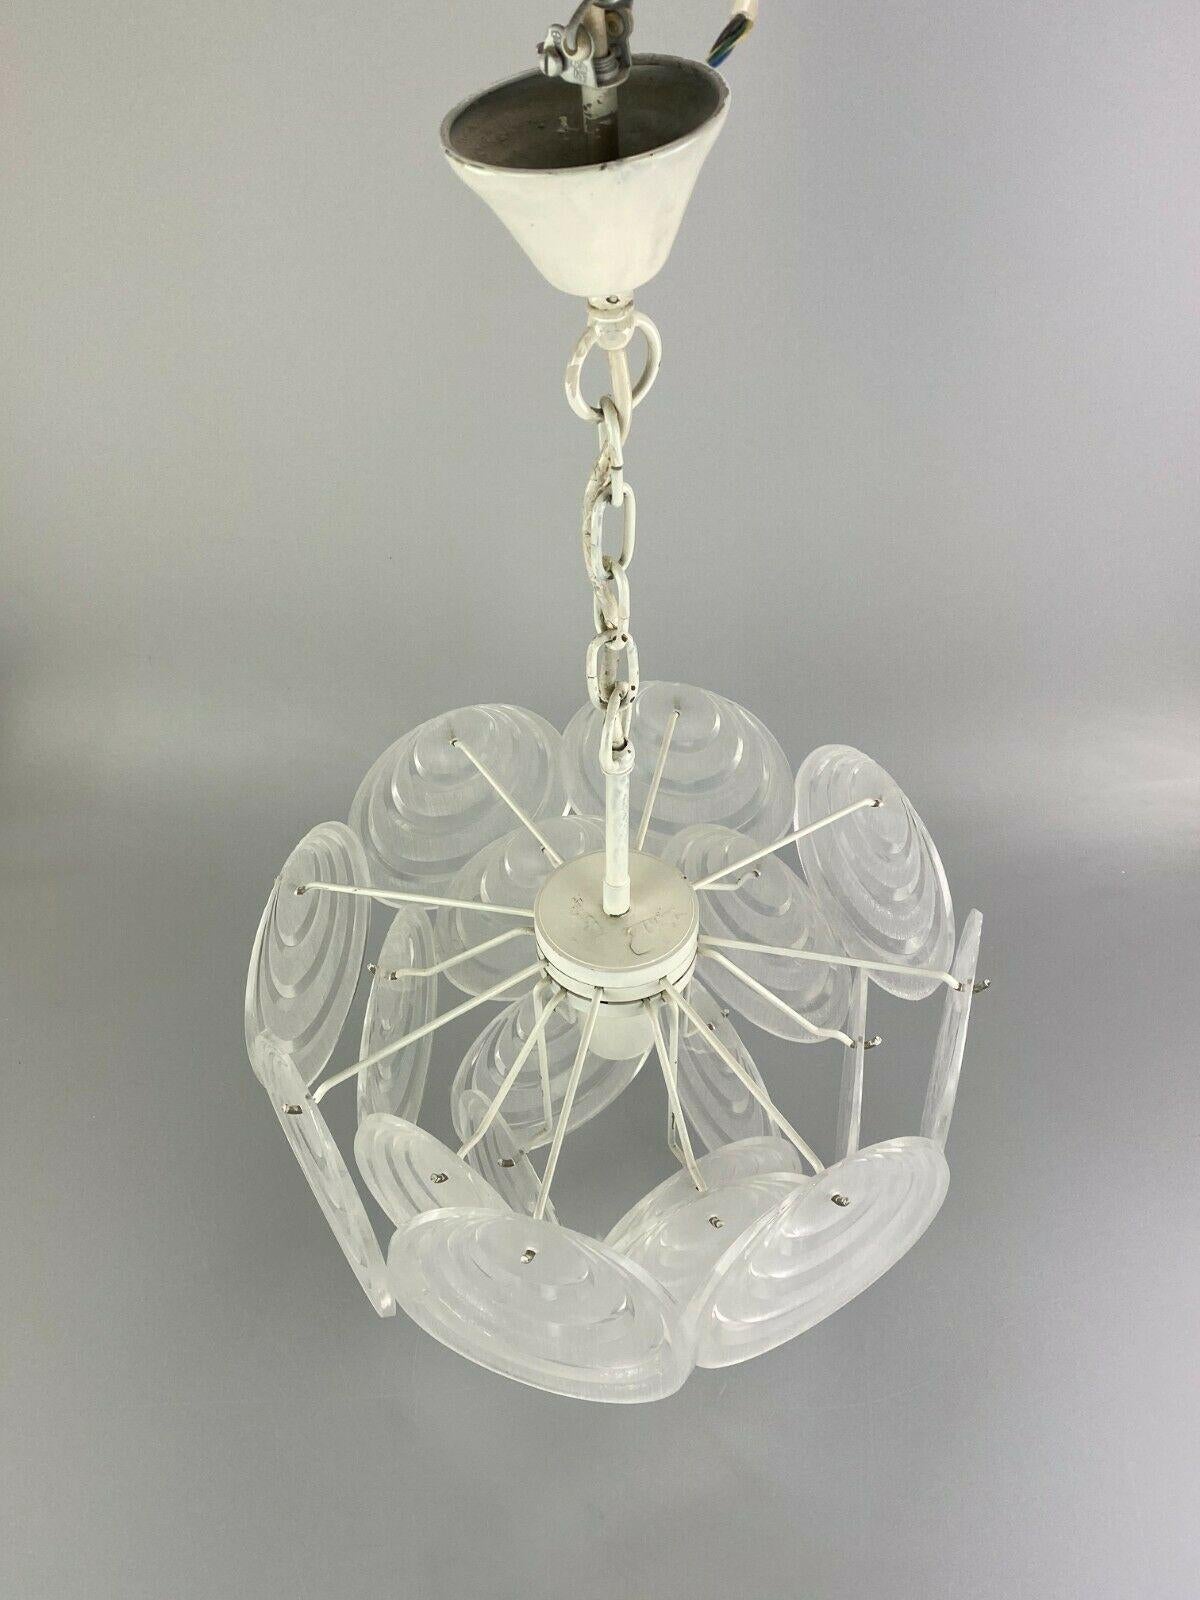 70s Lamp Light Hanging Lamp Ceiling Lamp Space Age Design Plastic For Sale 7